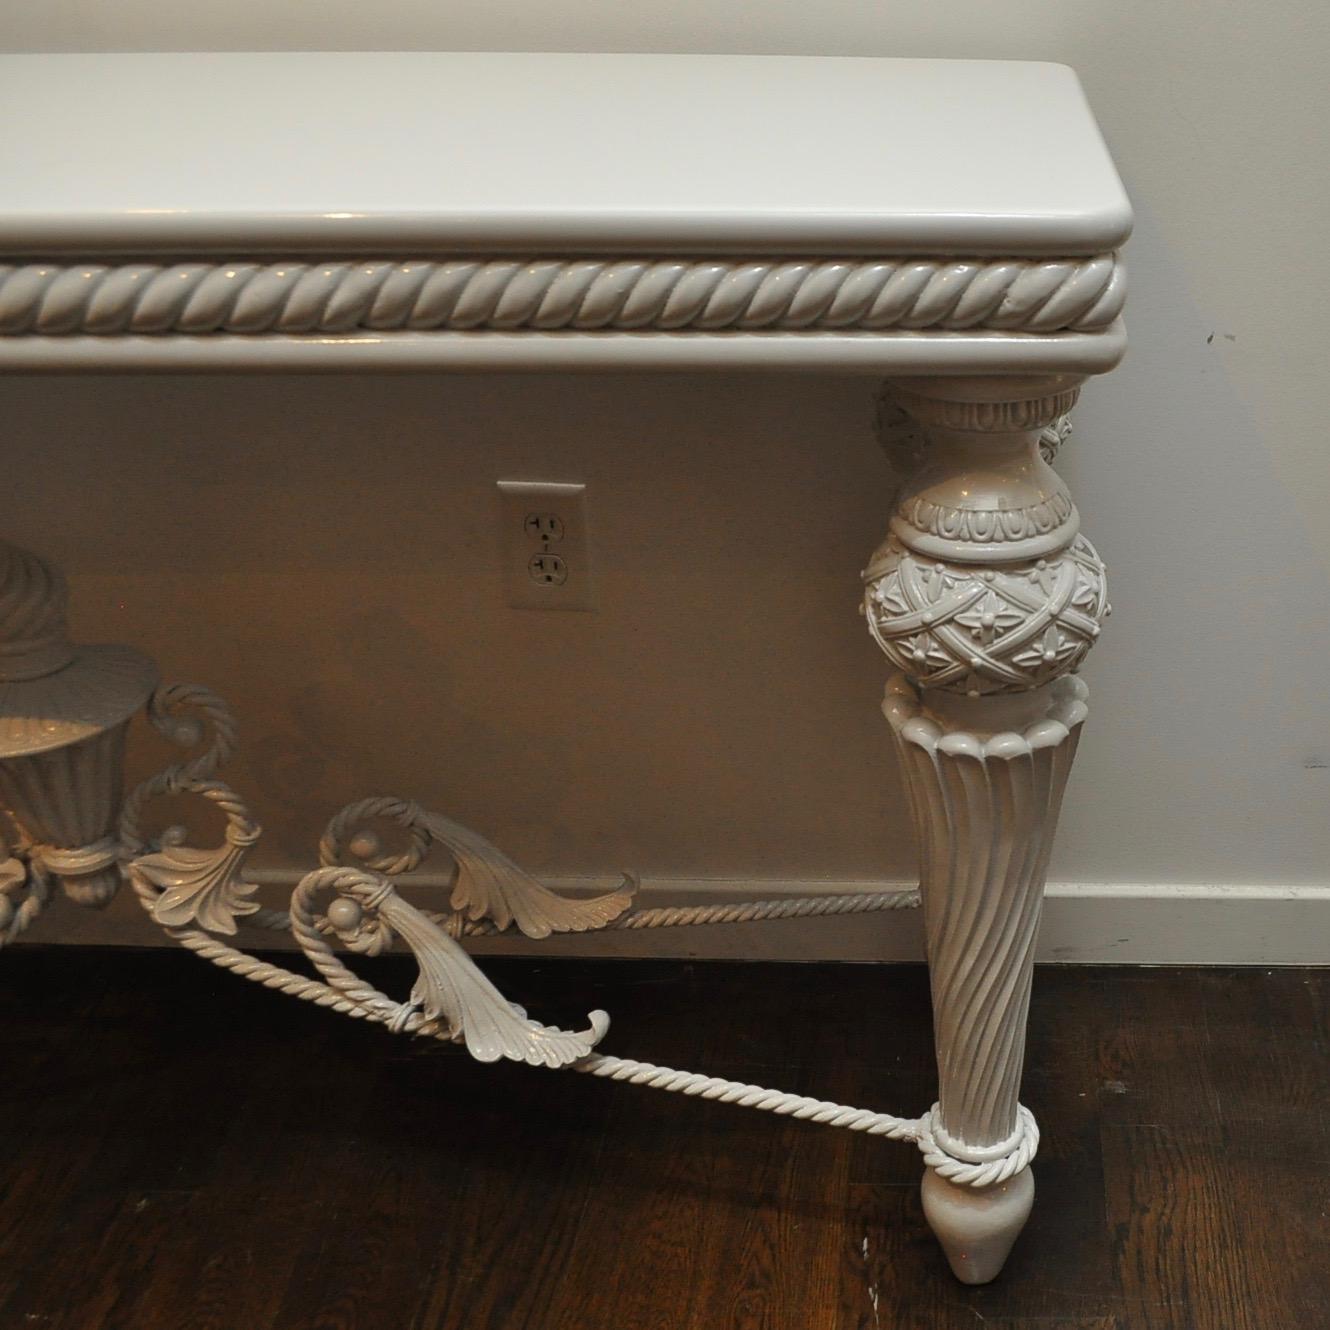 Dramatic french influence wrought iron and wood console table refreshed with a light grey high-gloss lacquer.